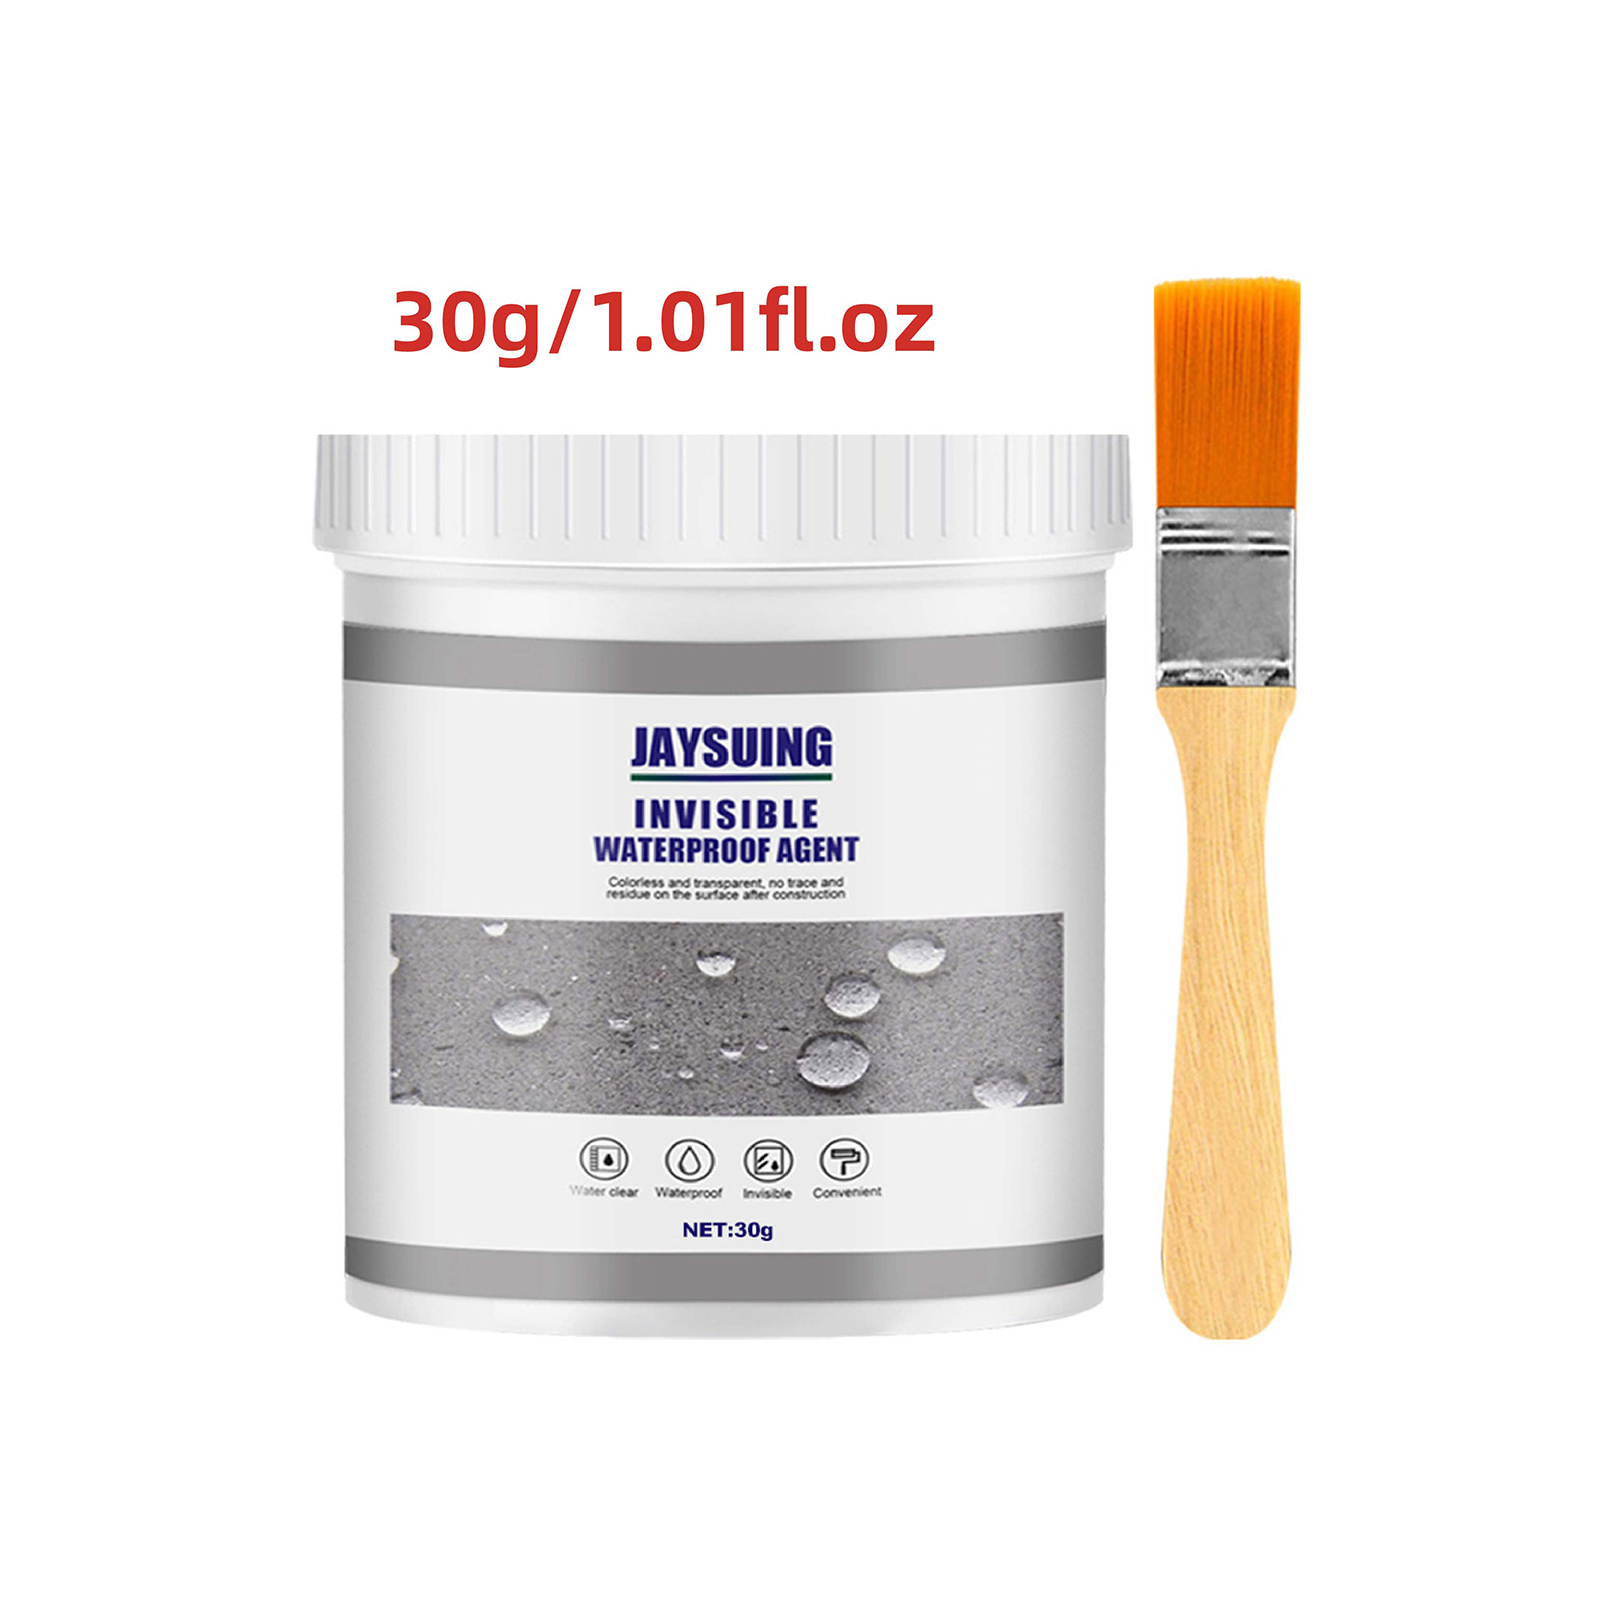 30-300g Invisible Waterproof Agent Insulating Sealant Anti-Leakage